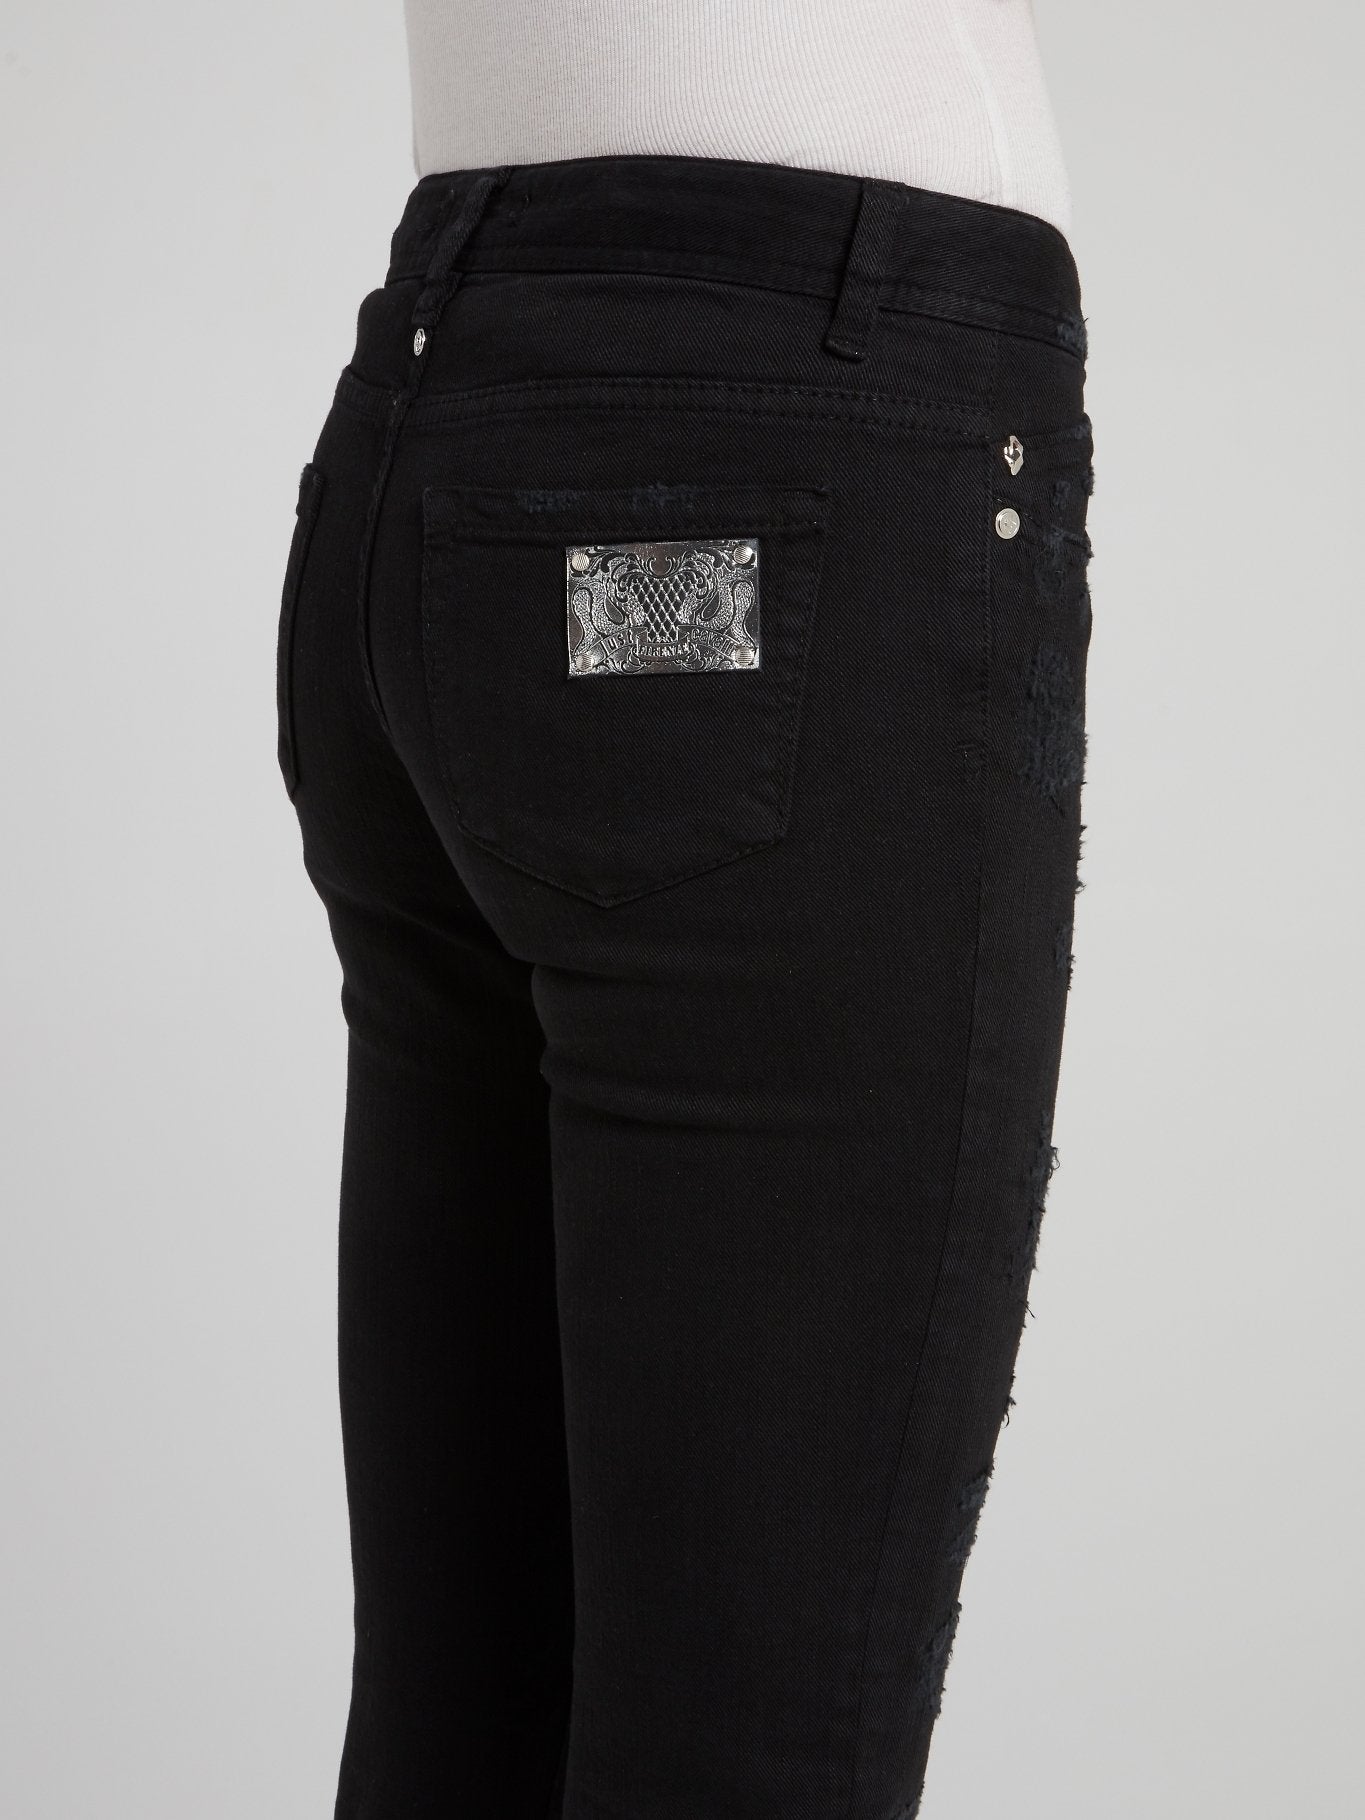 Black Distressed Cropped Jeans